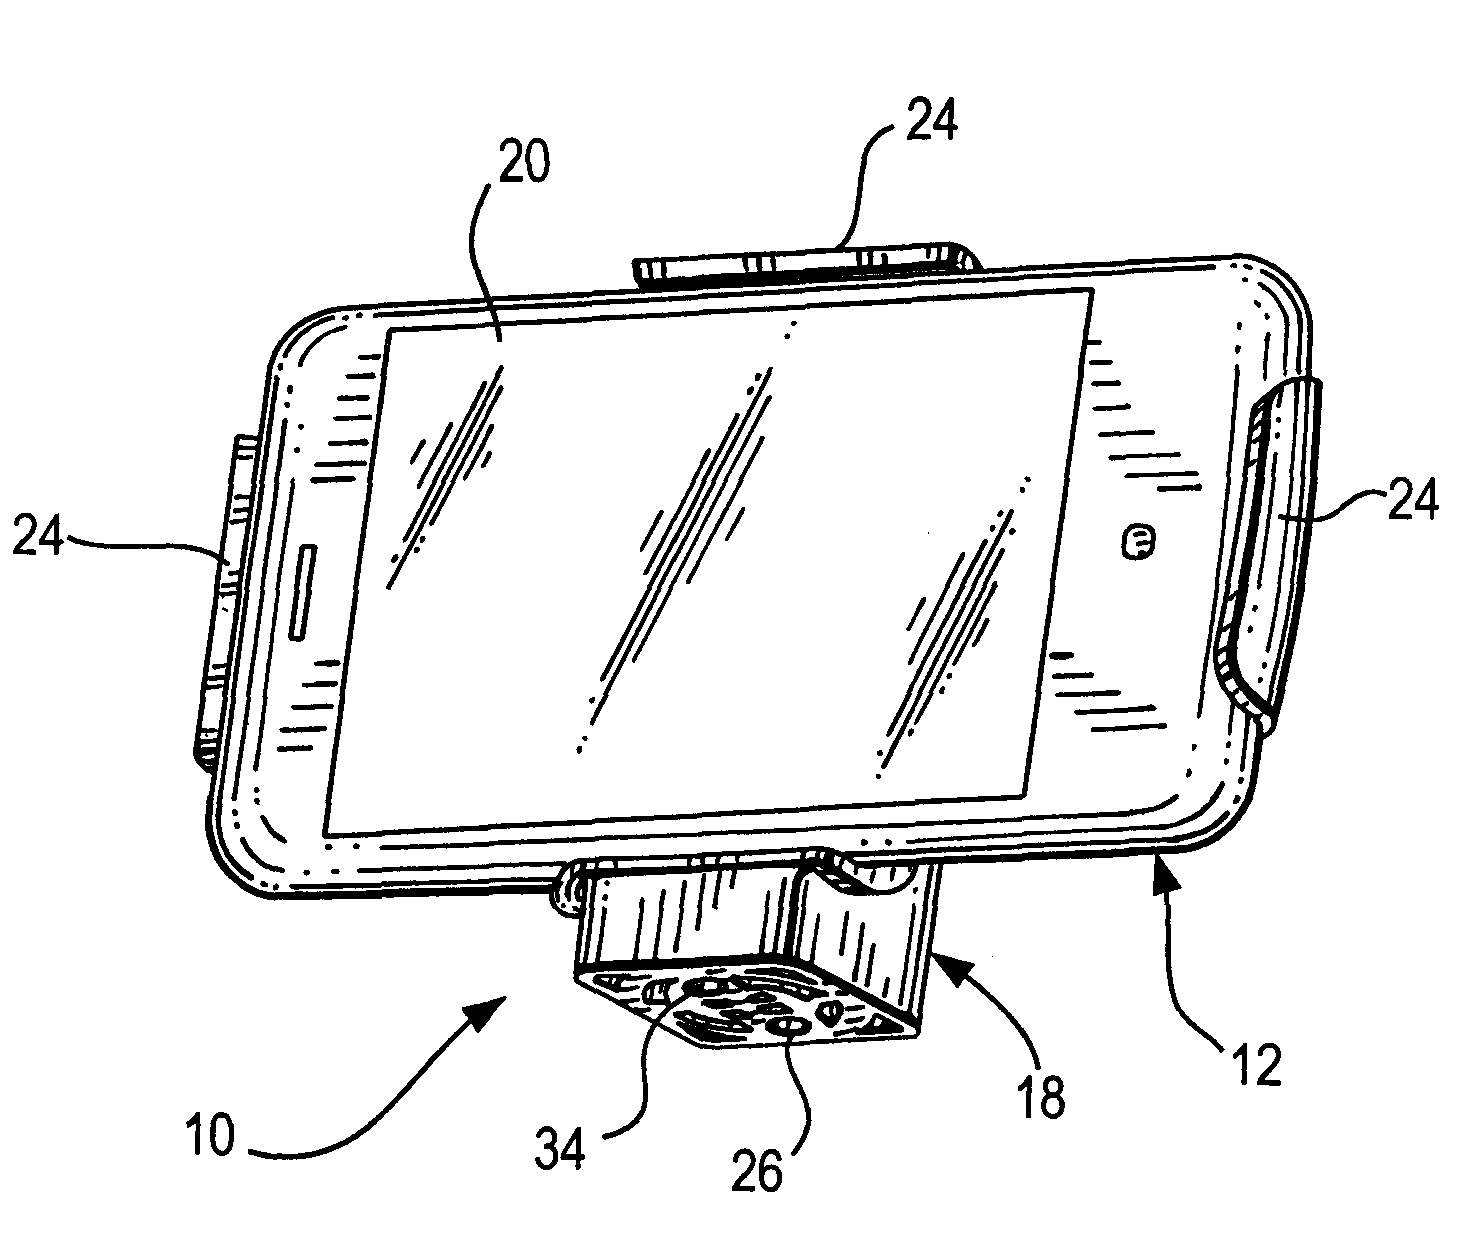 Stabilized mount for, and method of, steadily supporting a motion-sensitive, image capture device